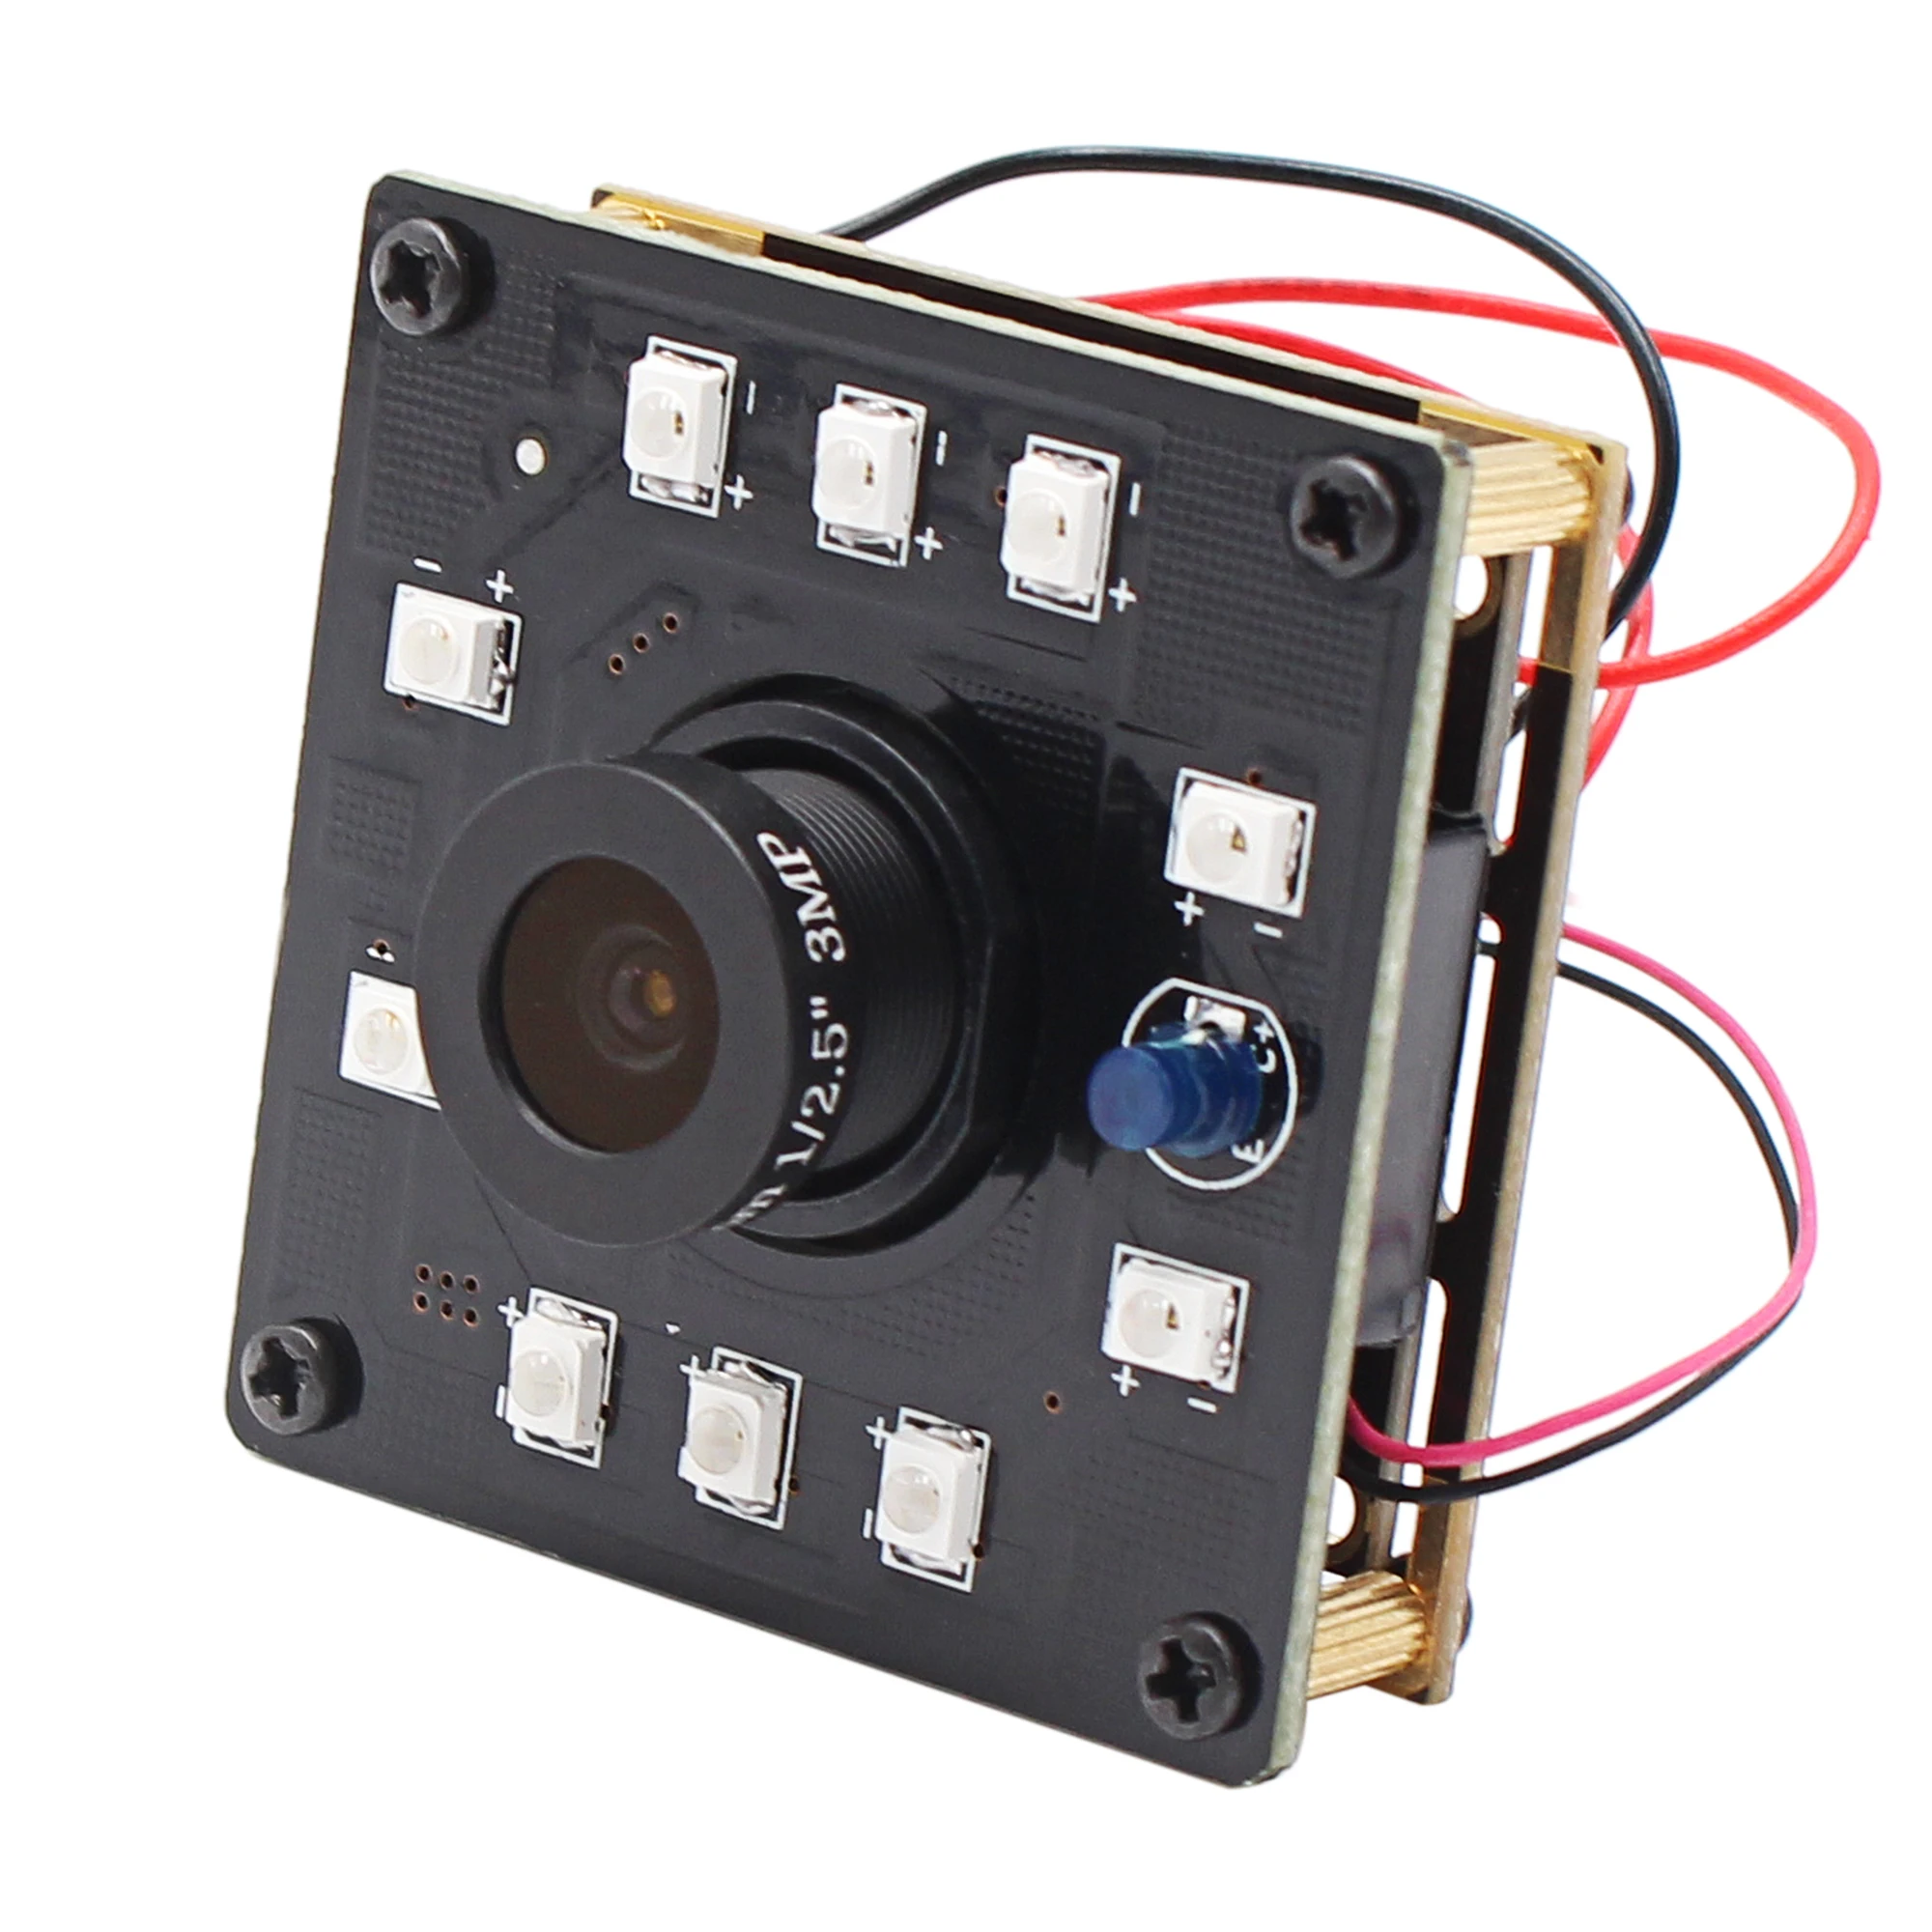 1080P HD Industrial Machine Vision Day Night  IR Led Board IR CUT Mini USB Camera Module for Android Linux Winodws Mac OS images - 6